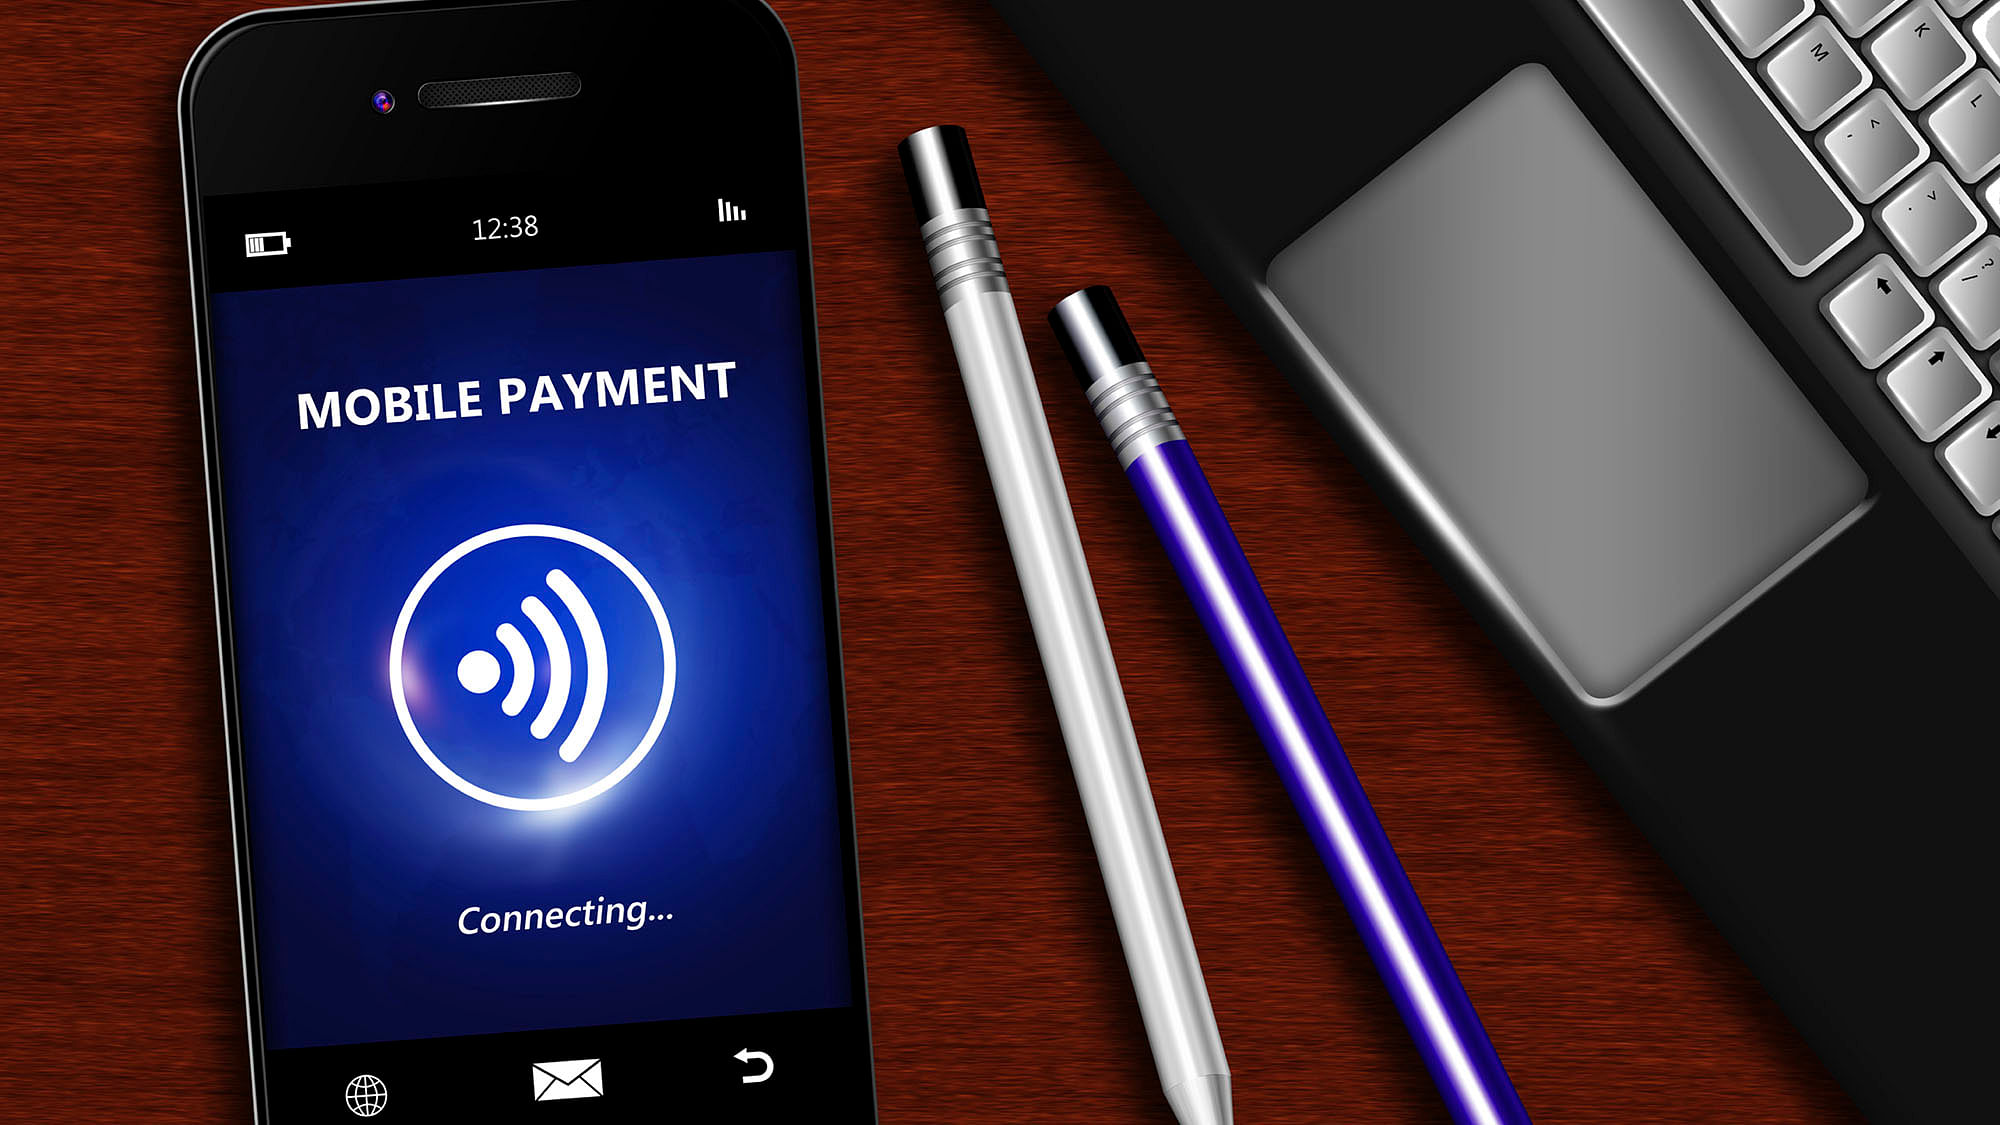 Soon everyone with a mobile phone can pay money digitally. (Photo: iStockphoto)